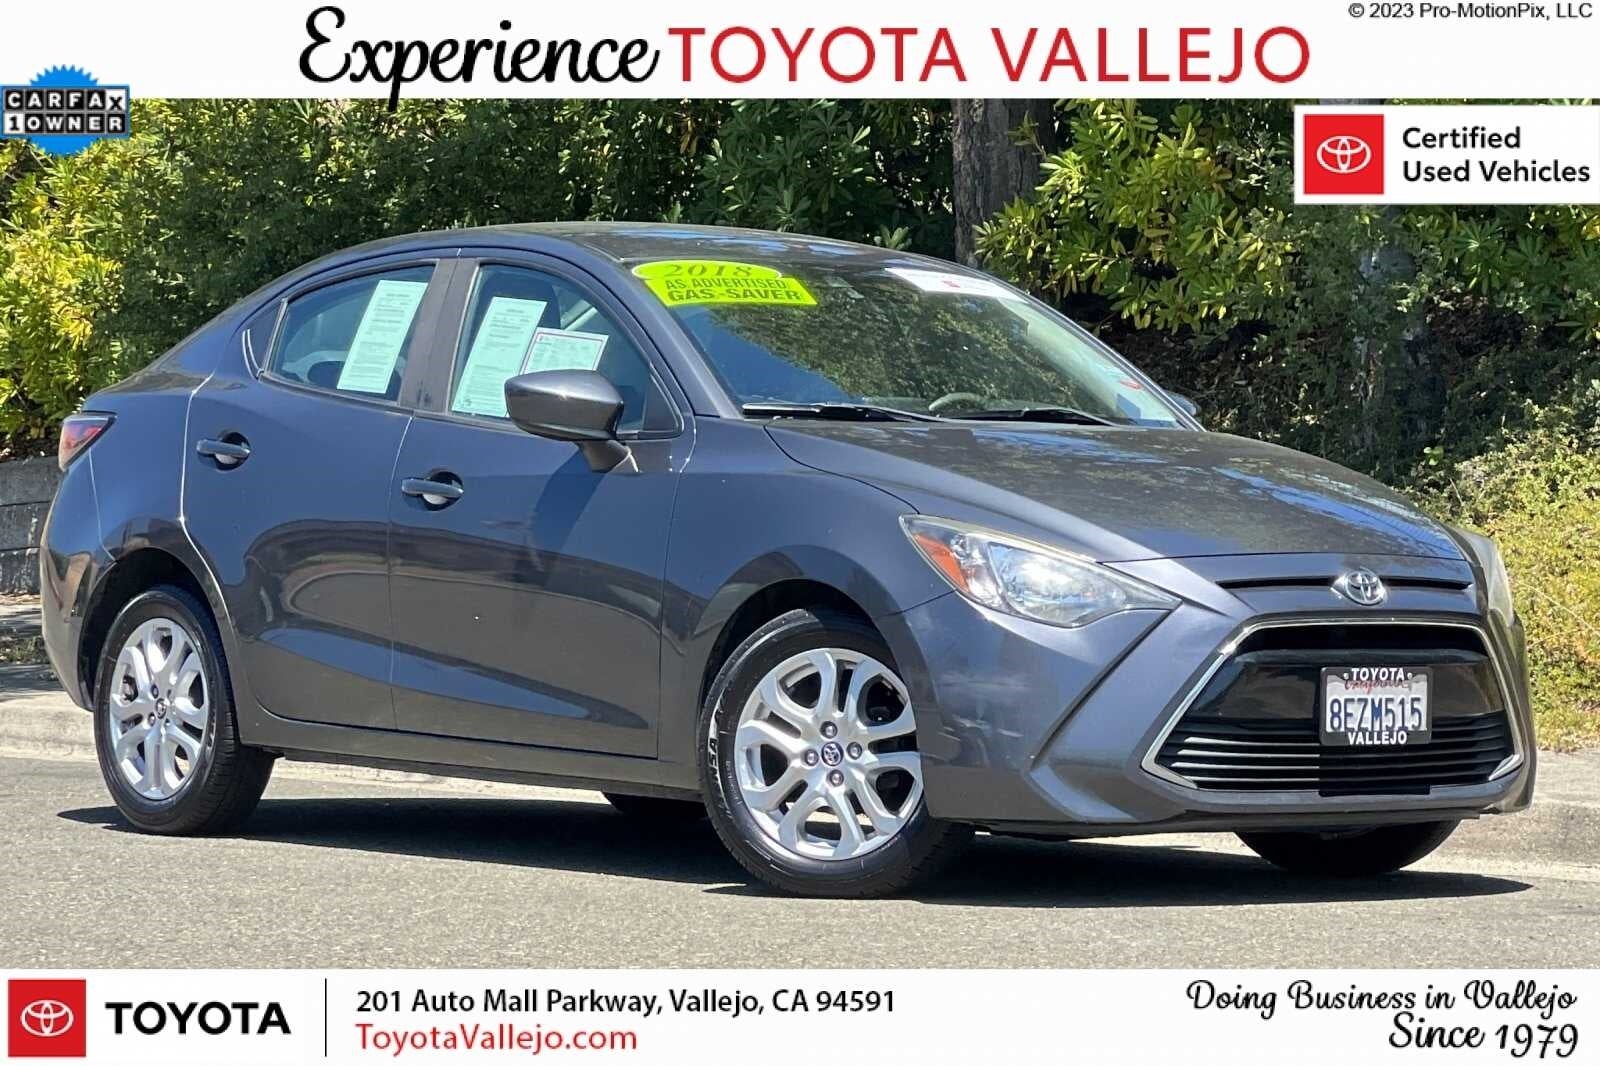 Used 2018 Toyota Yaris iA Base with VIN 3MYDLBYV5JY323201 for sale in Vallejo, CA